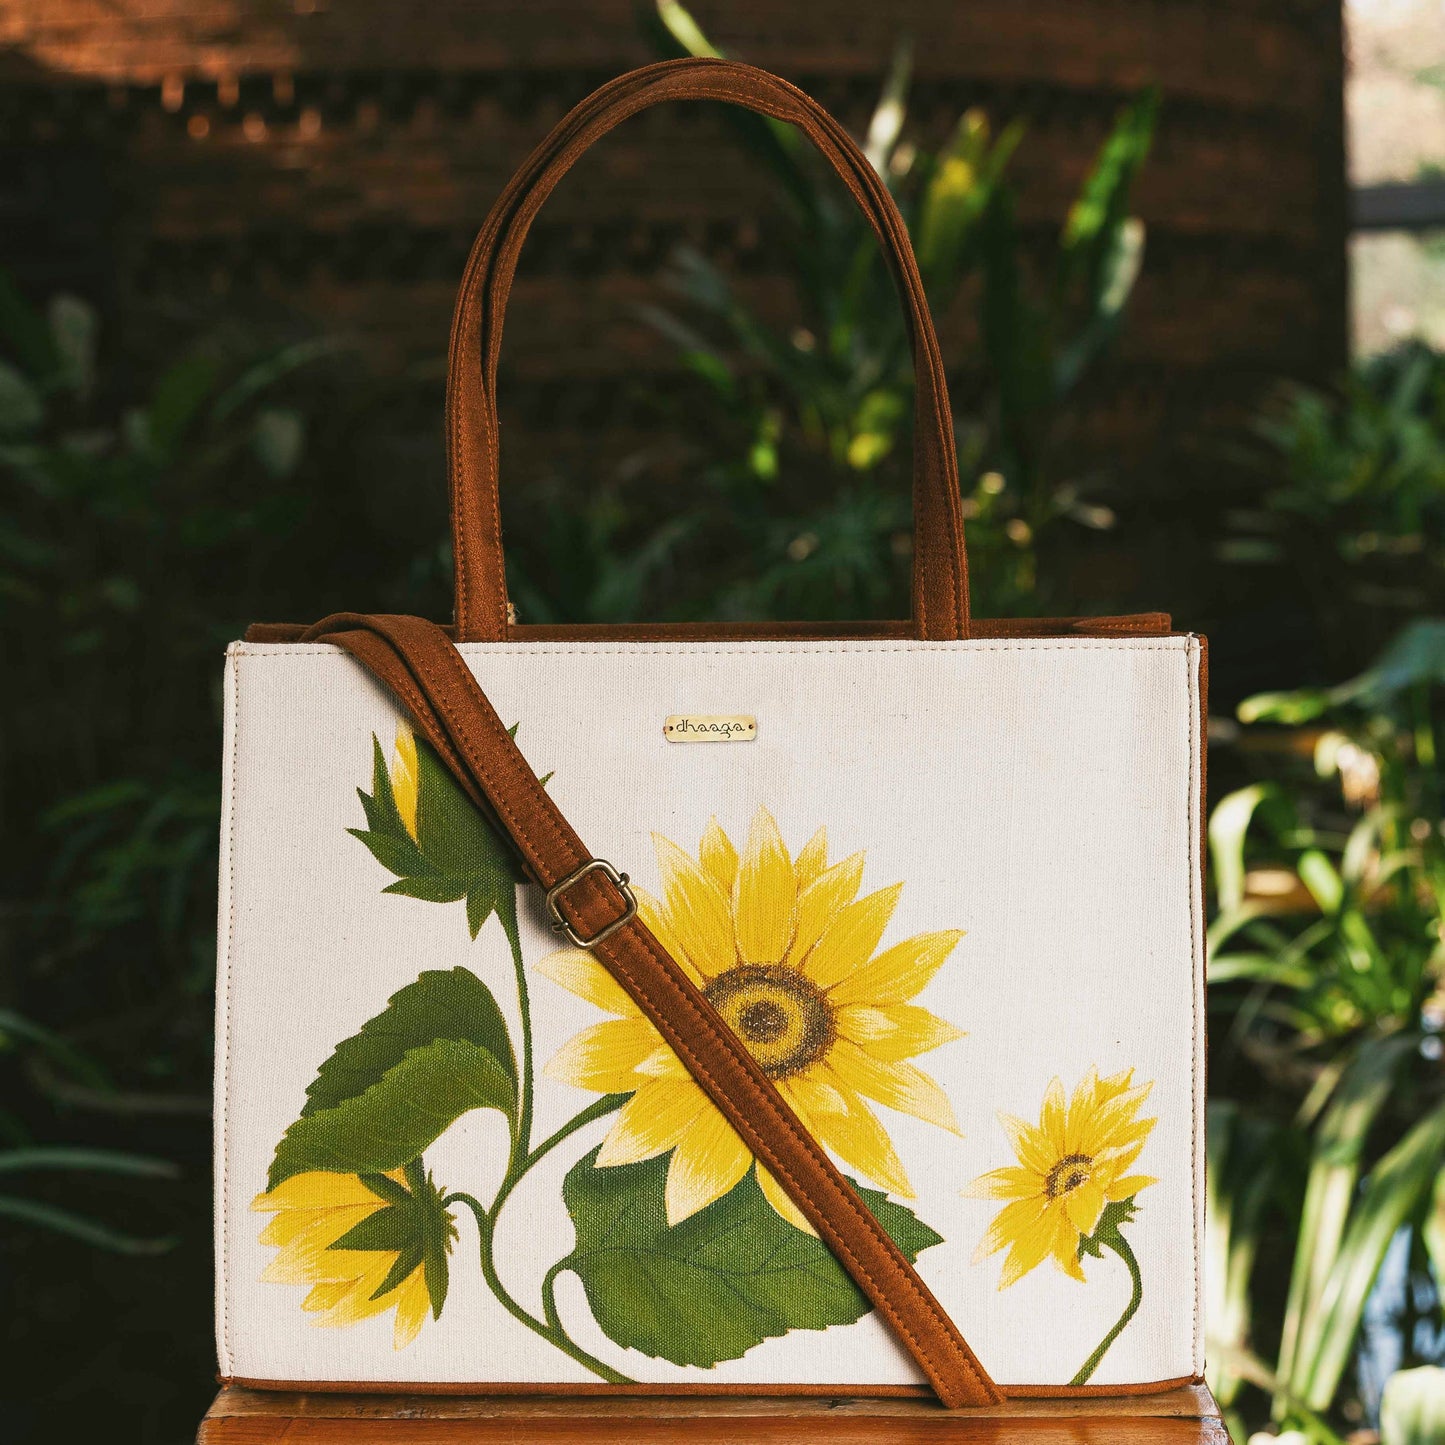 Personalised Hand-painted Sunflower Tote Bag